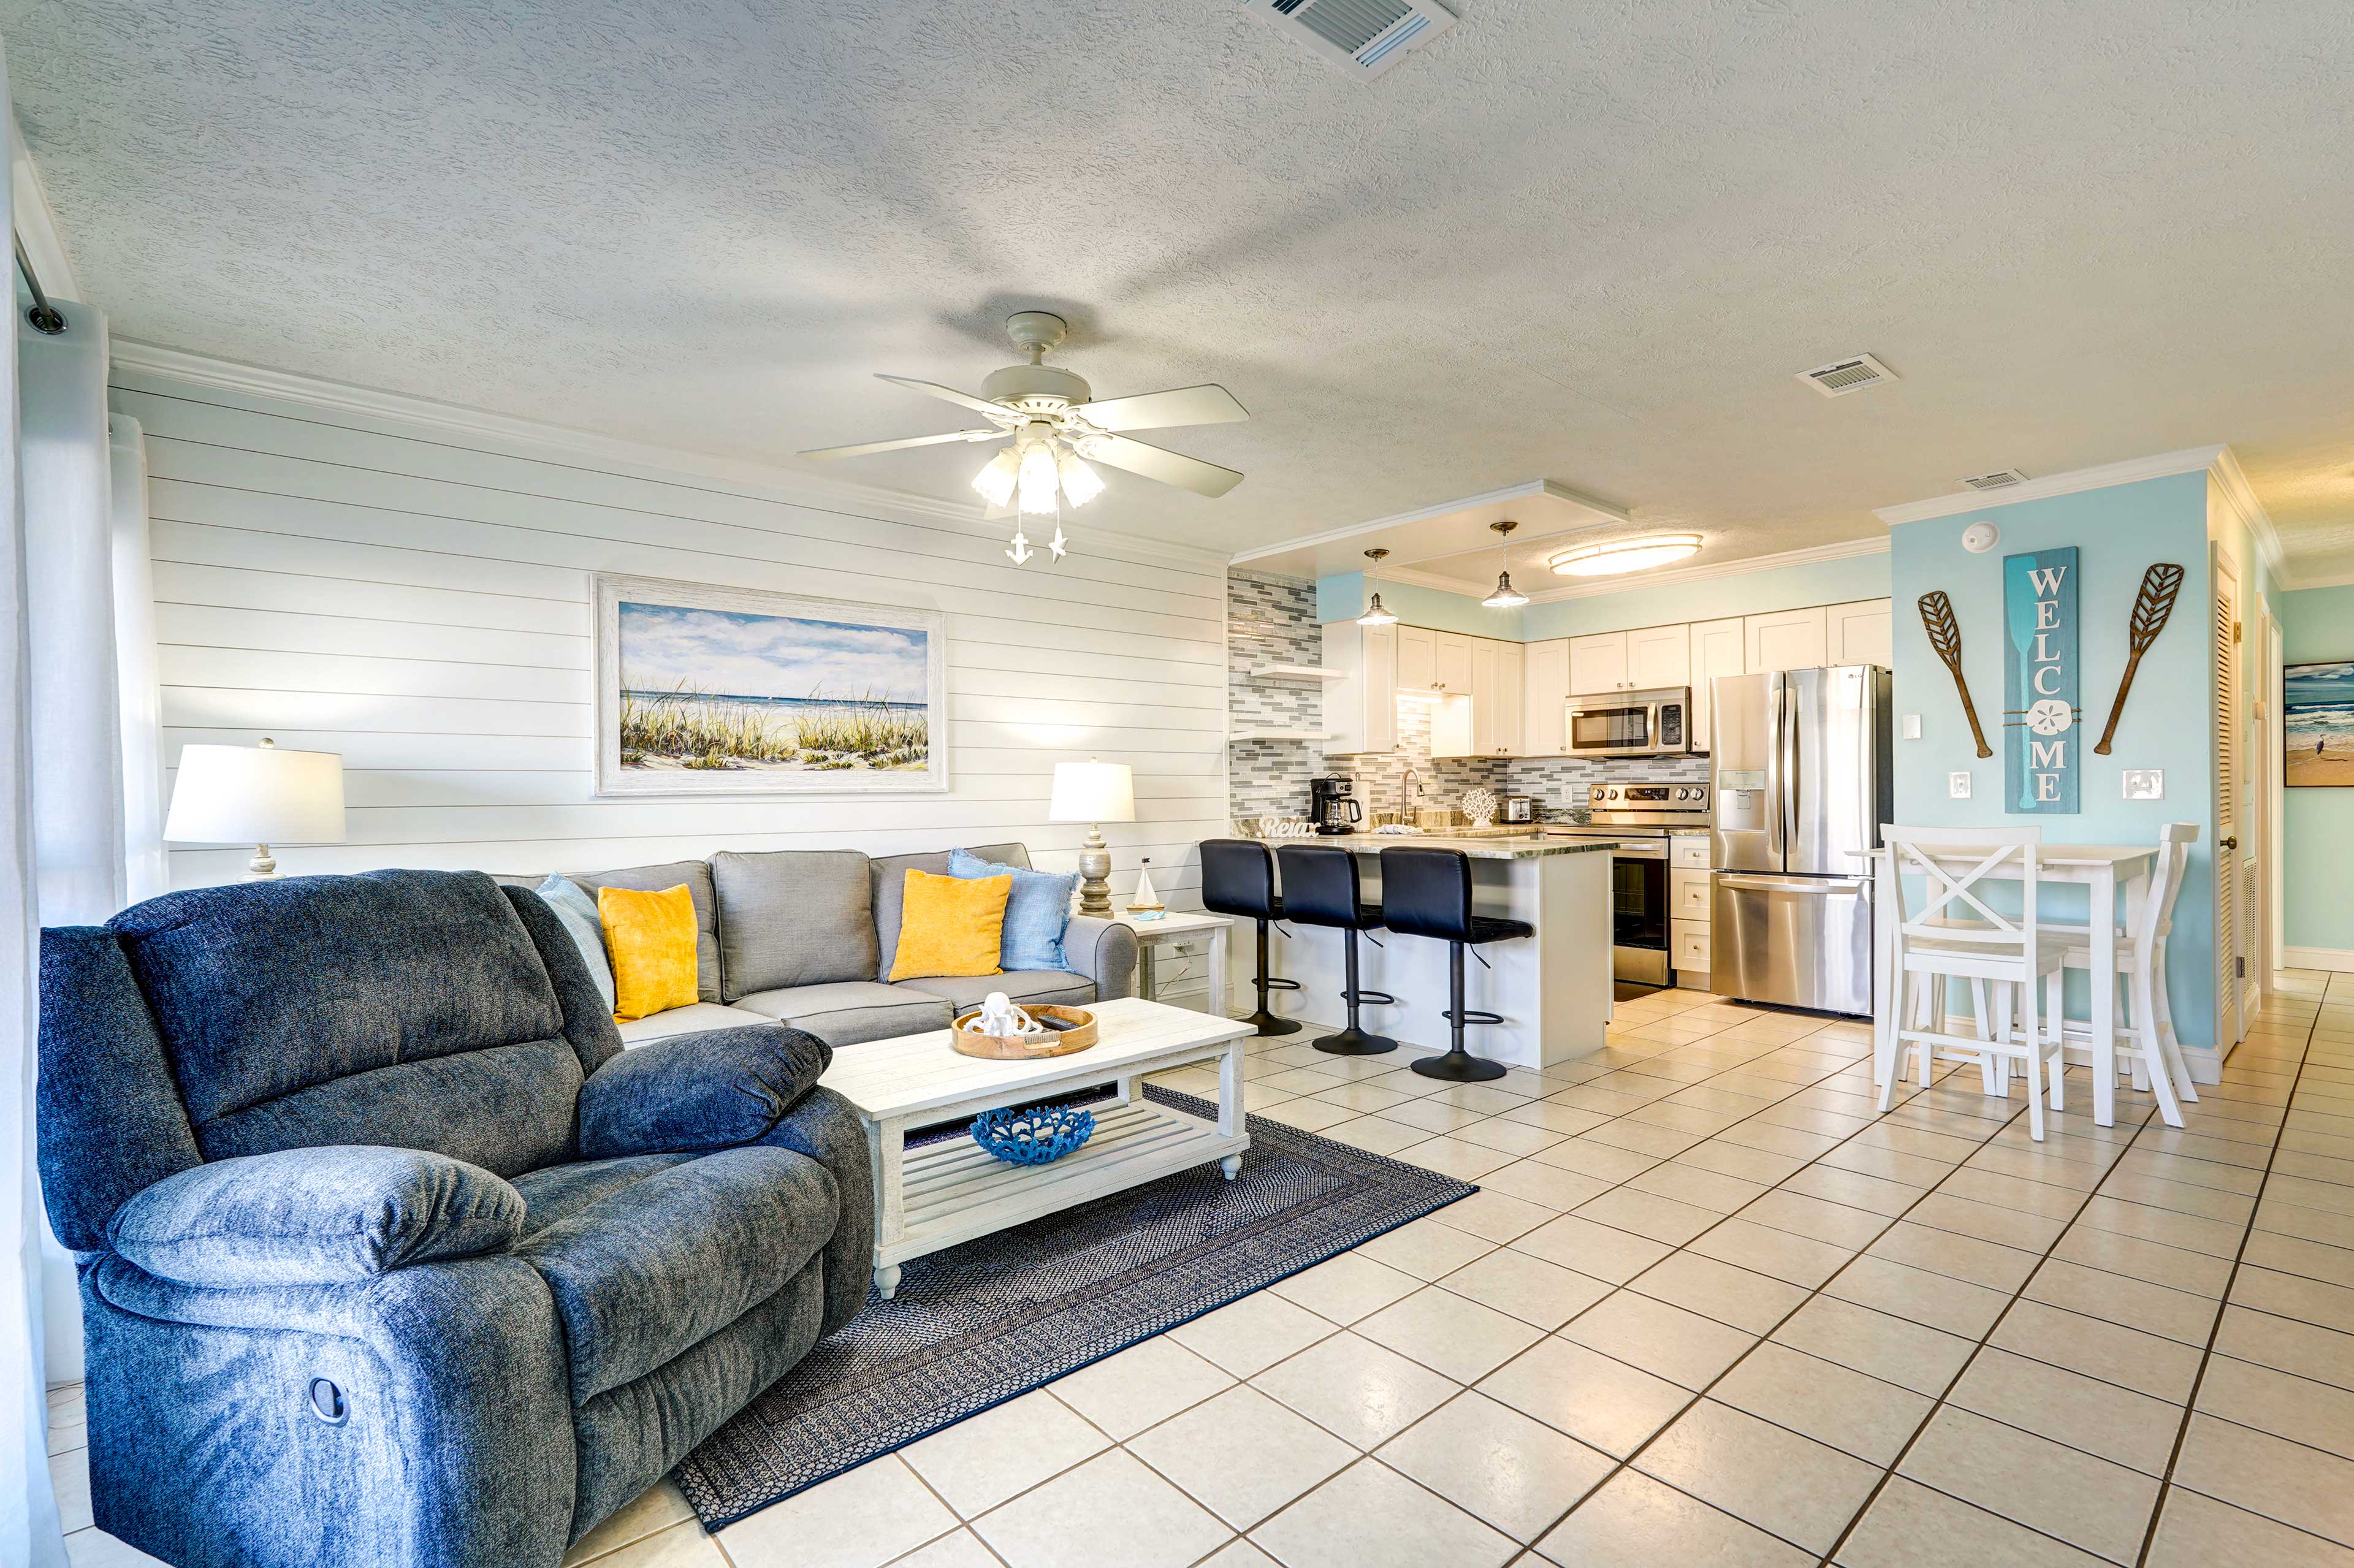 Panama City Beach Vacation Rental | 2BR | 2BA | 1/2 Step Required to Enter